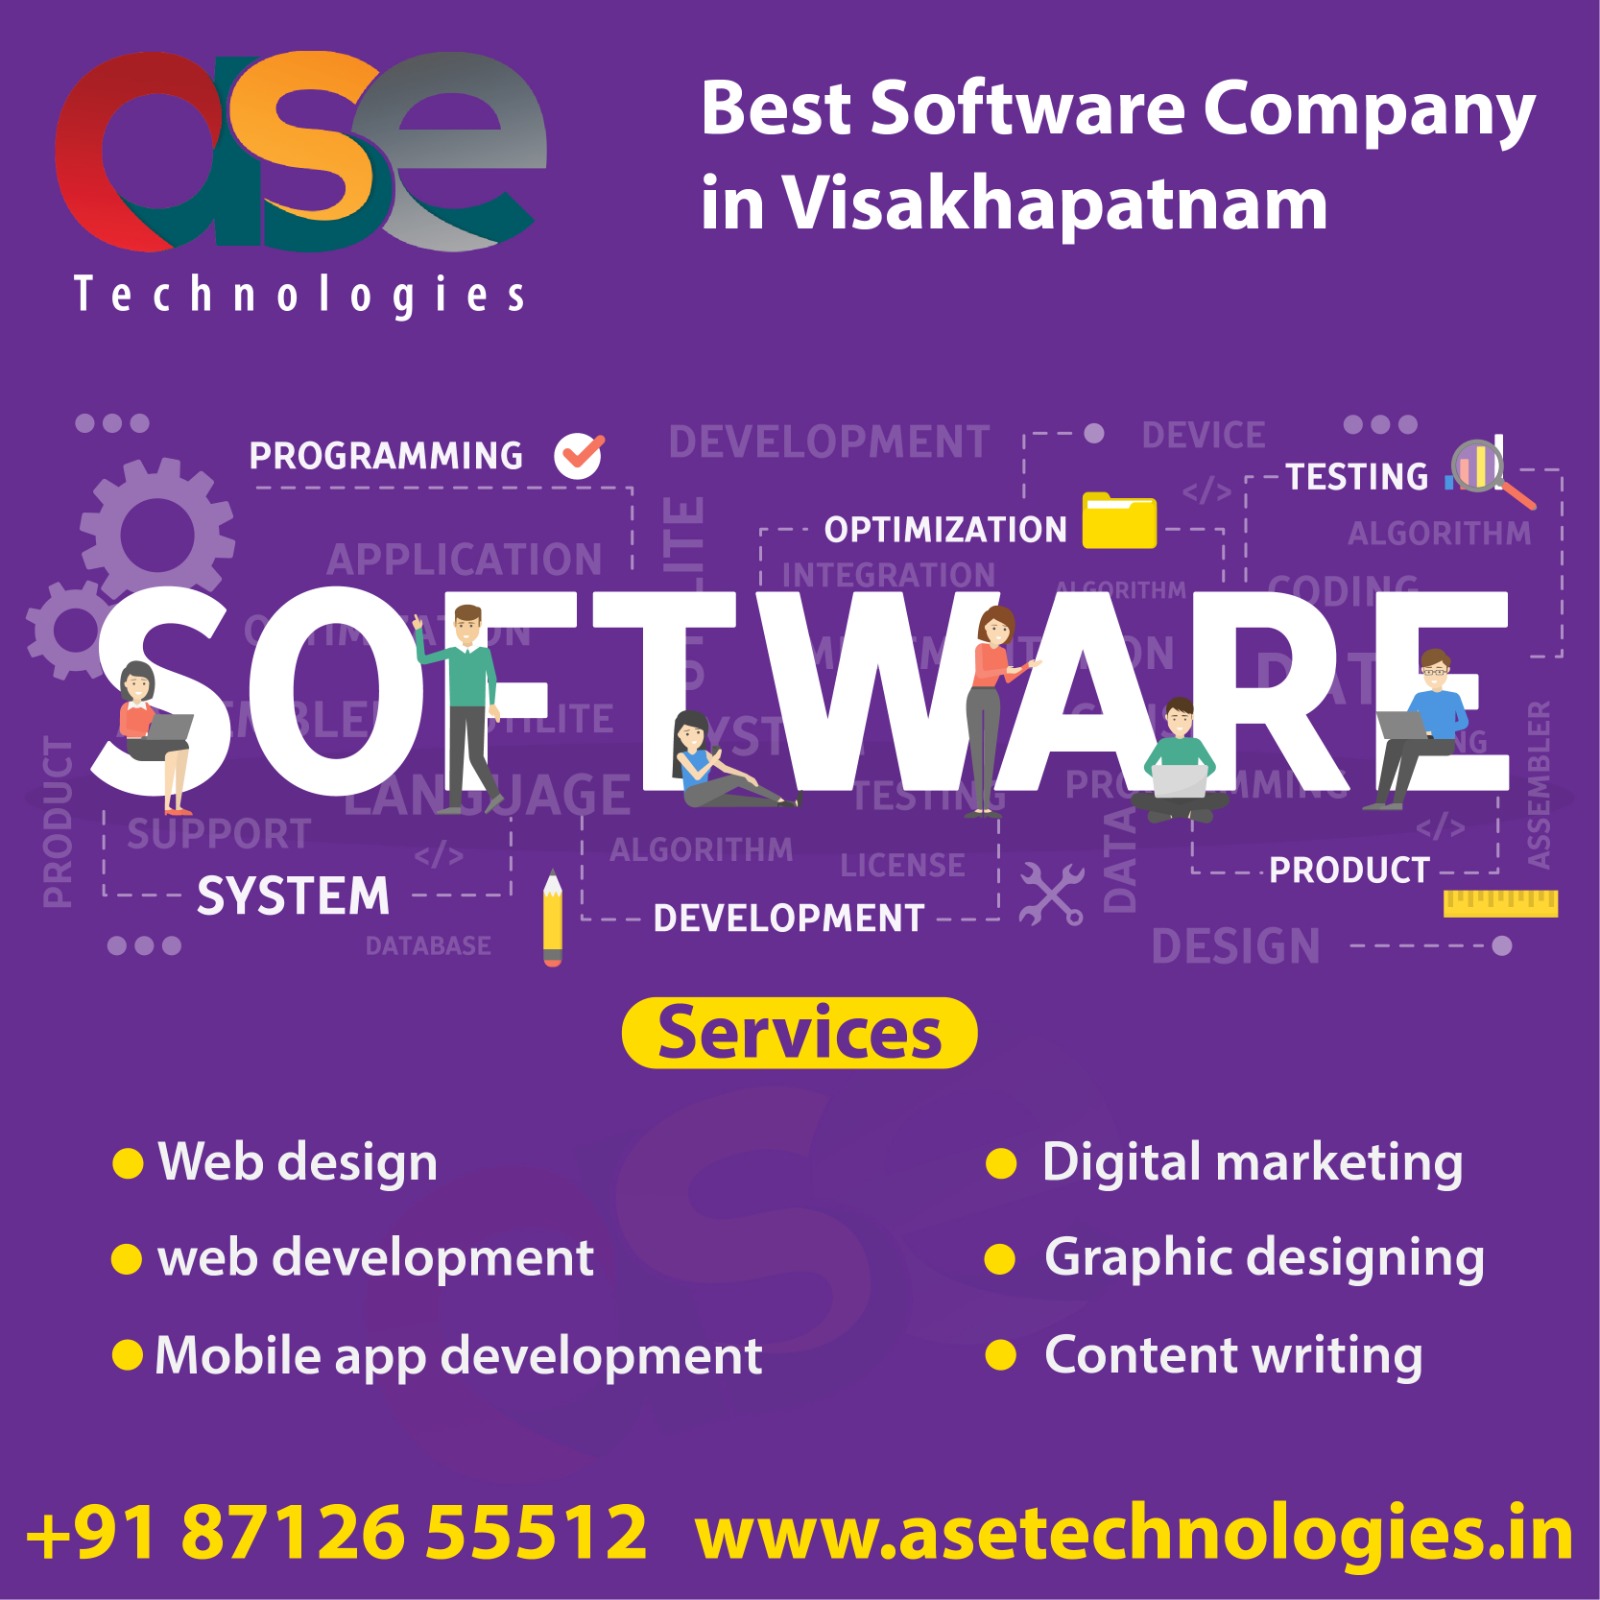 Best Software Company in Visakhapatnam